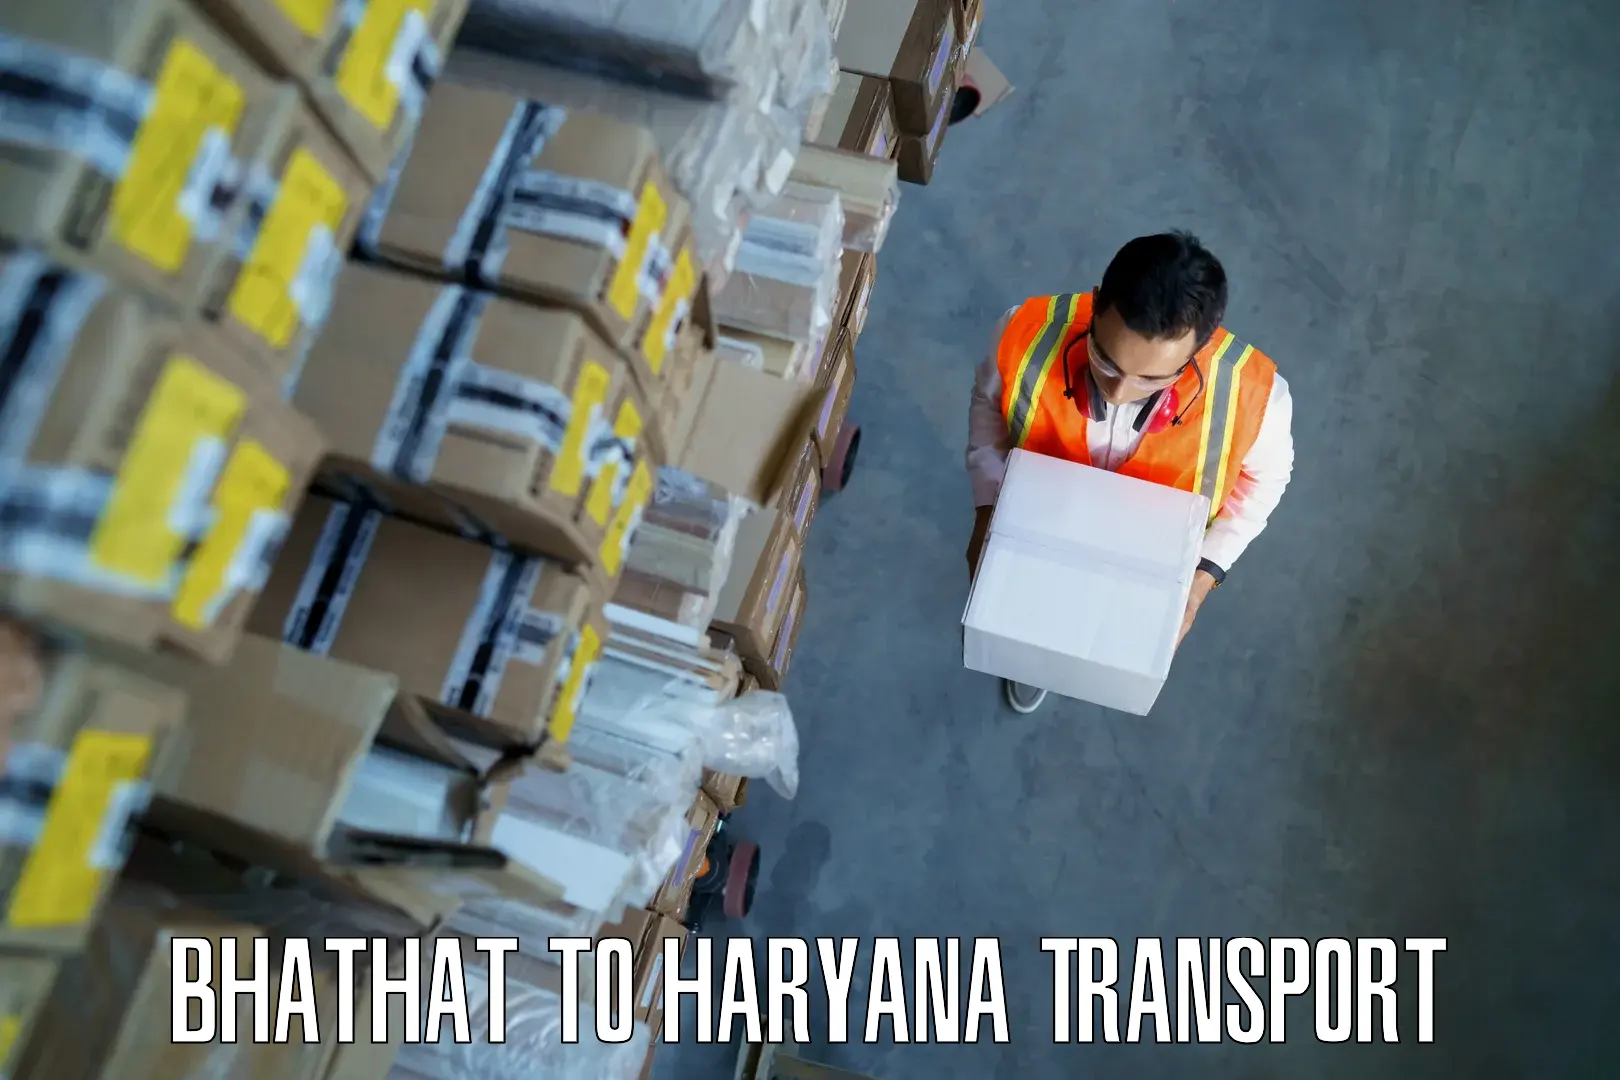 Shipping partner Bhathat to Sohna